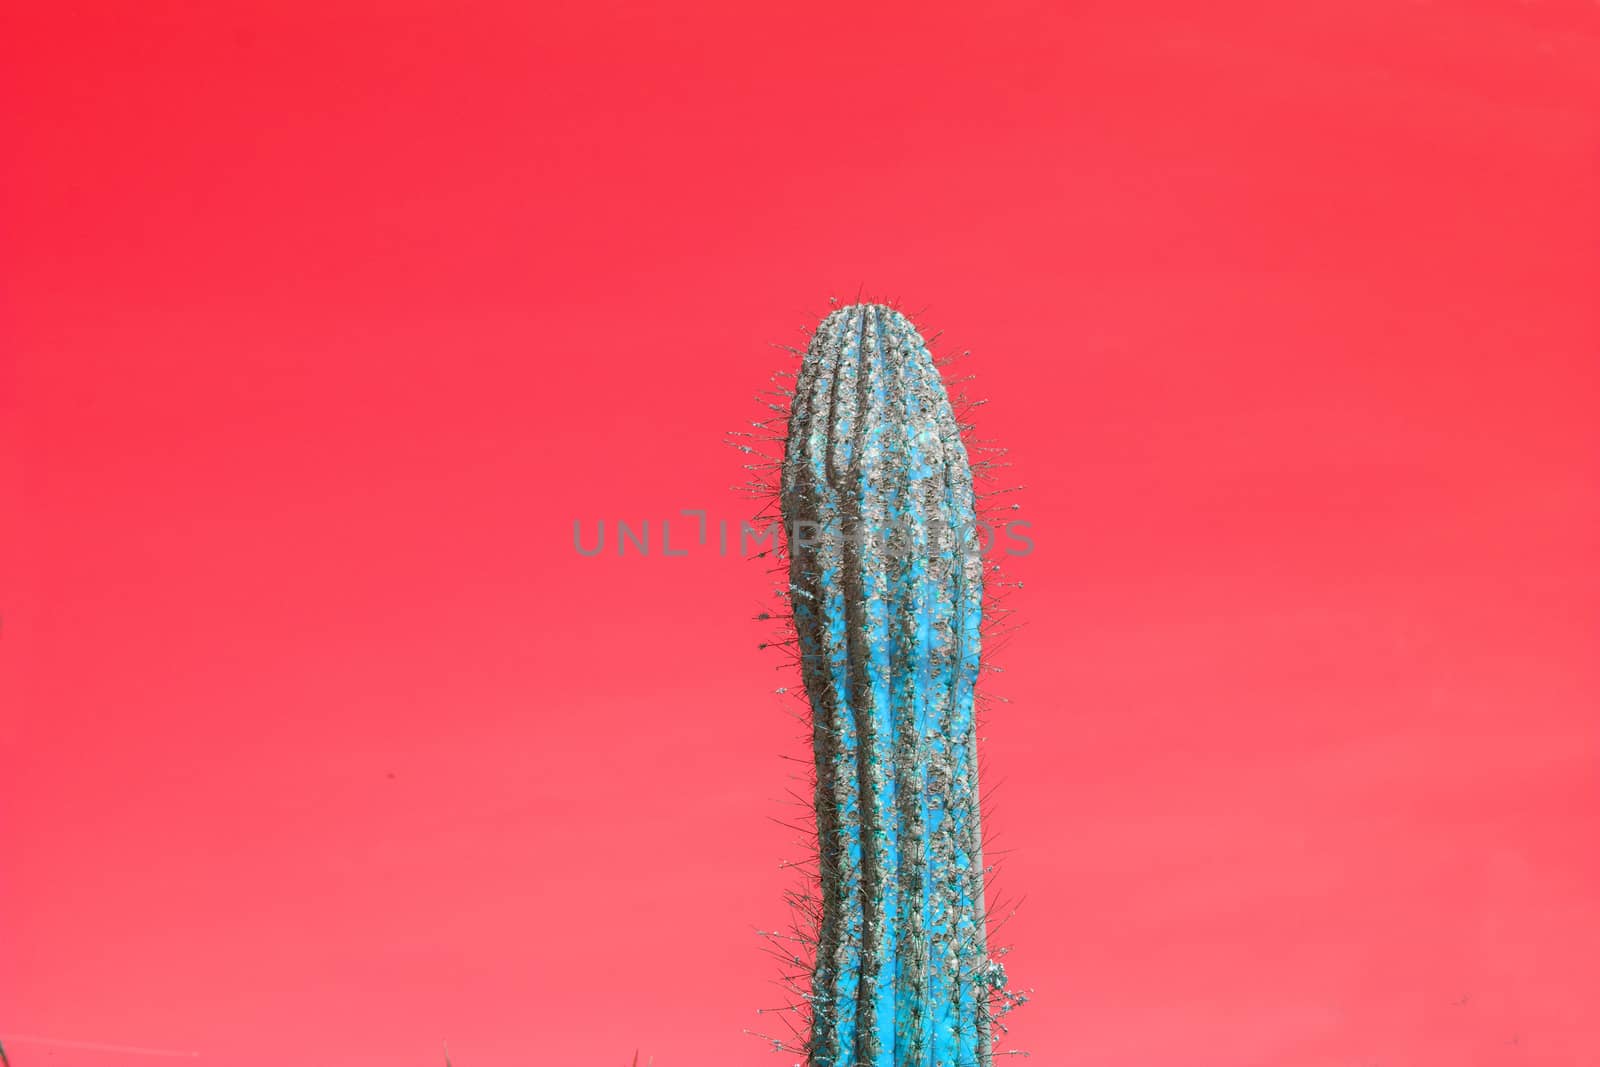 Abstract surrealistic turquoise color thorny single cactus with spikes against red sky